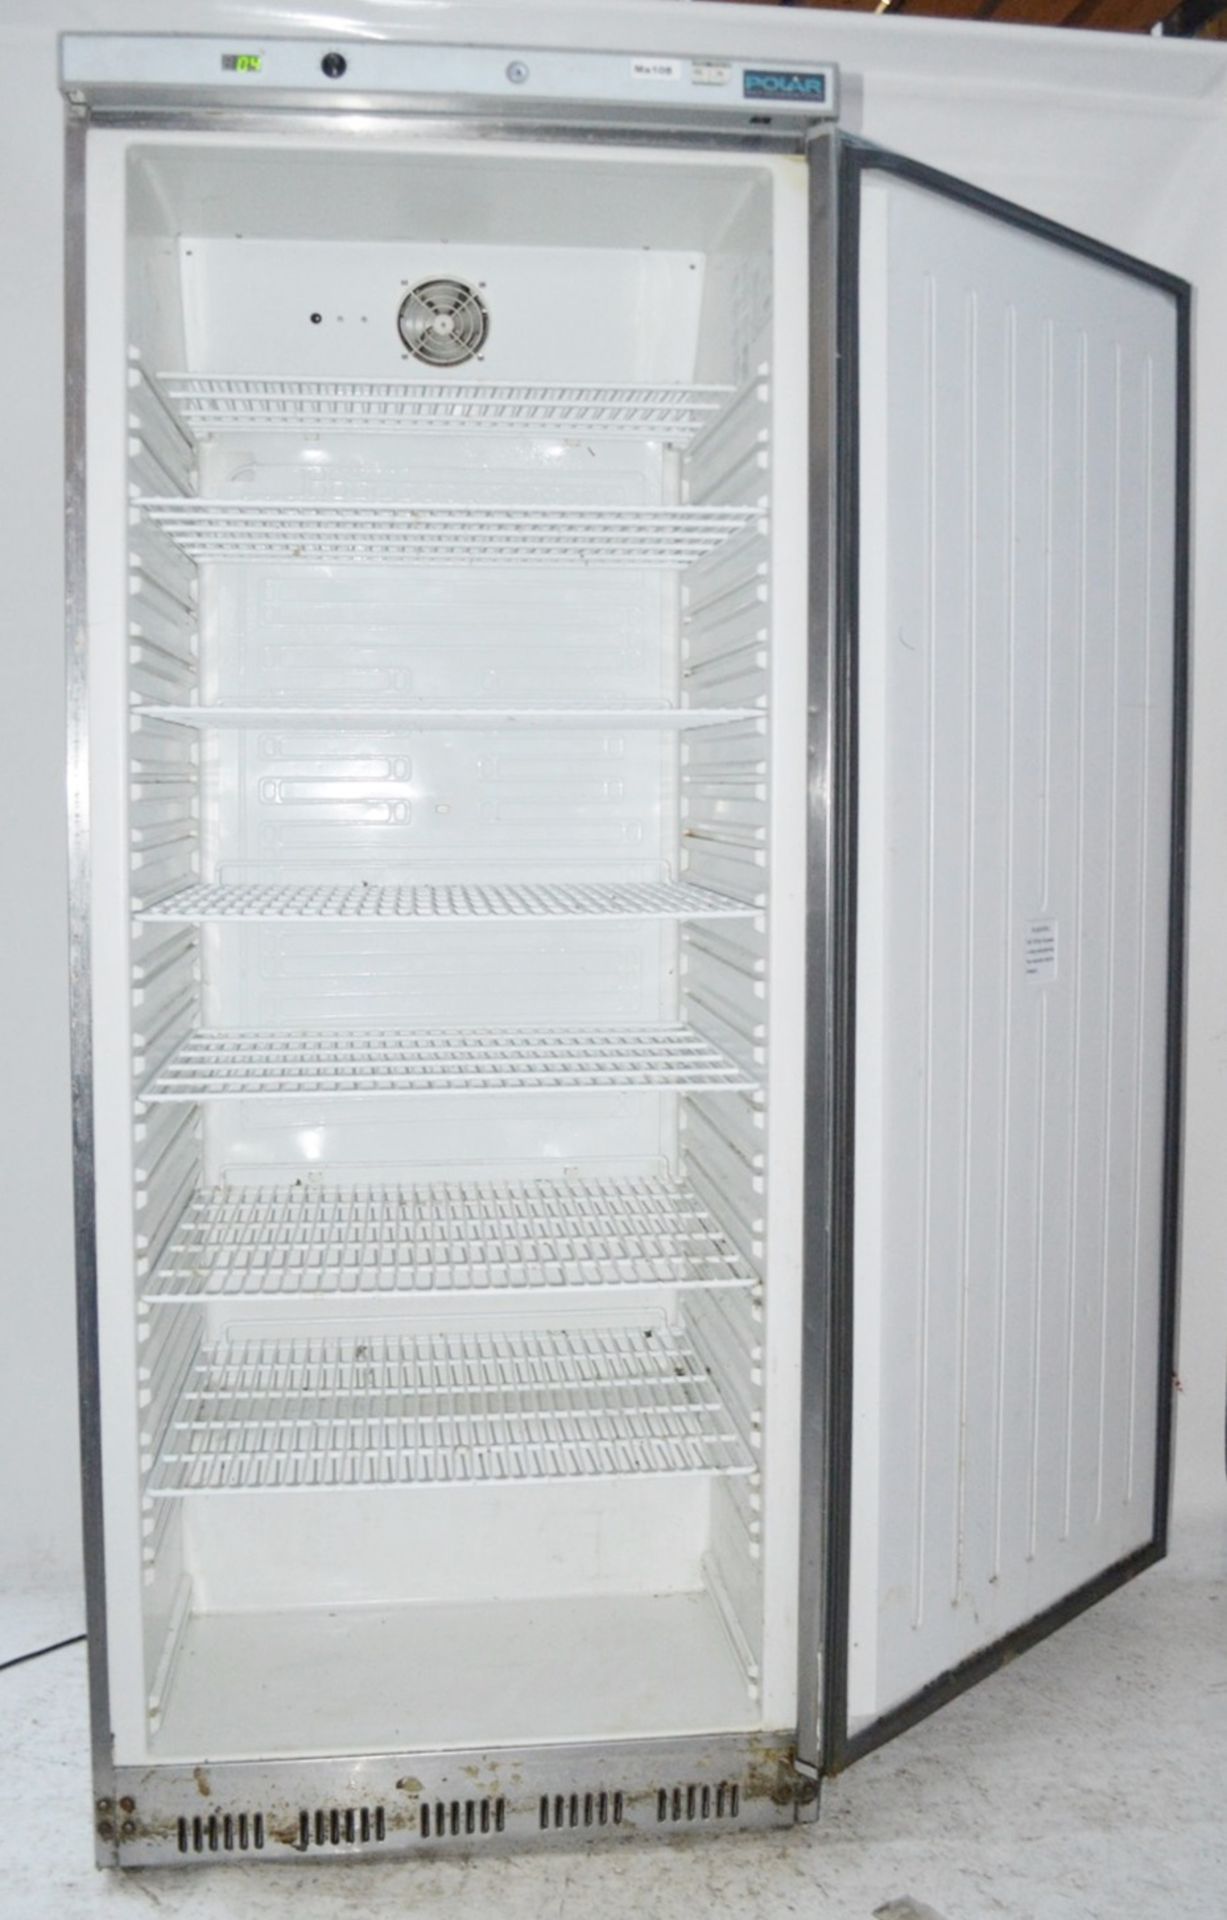 1 x Polar CD084 600 Ltr Single Door Upright Fridge - Recently Removed From A Commercial Kitchen - Image 2 of 7